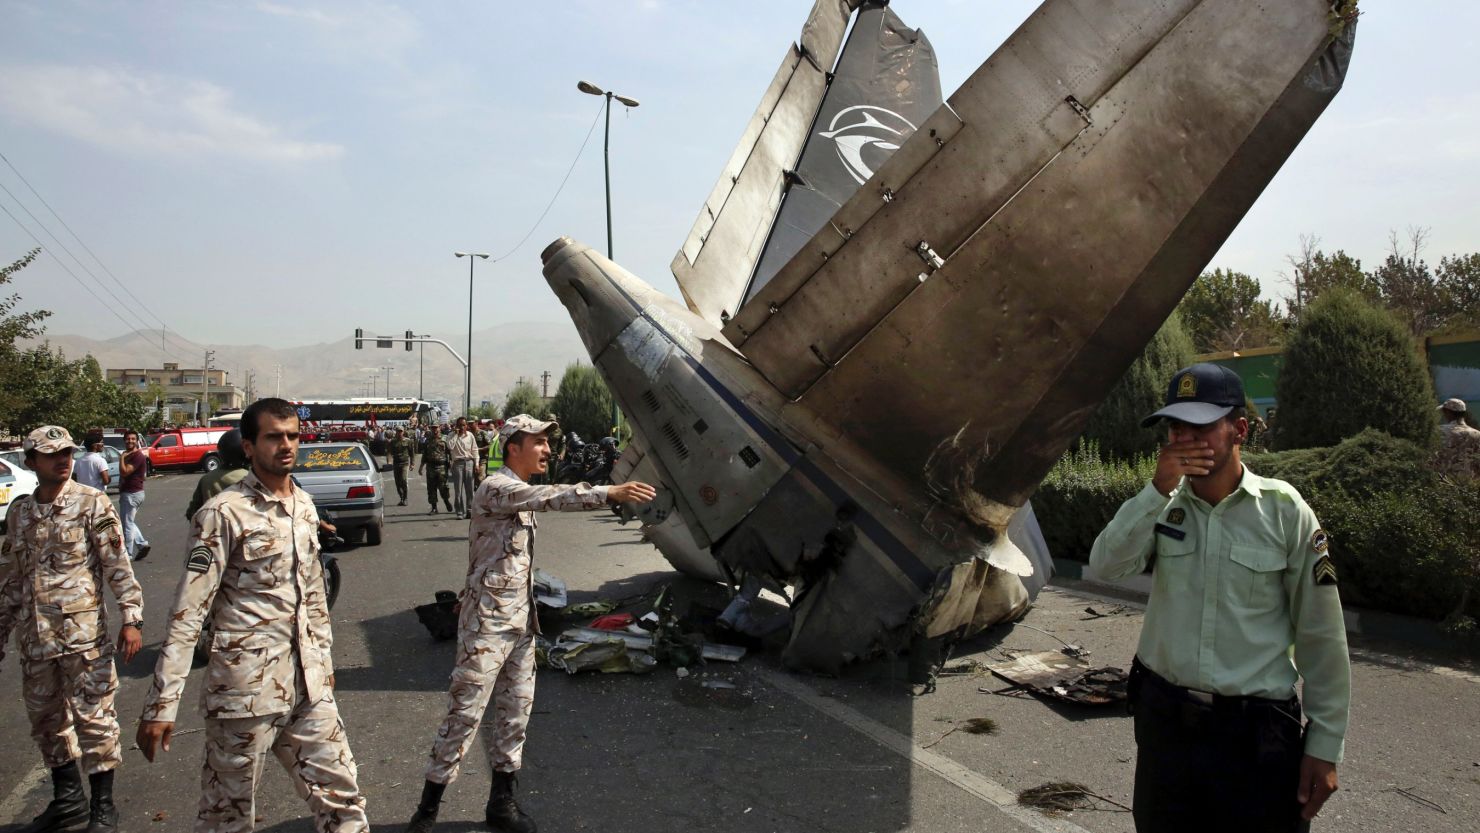 Iranian Revolutionary Guards and police officers inspect the site of a passenger plane crash in Tehran, Iran's capital.